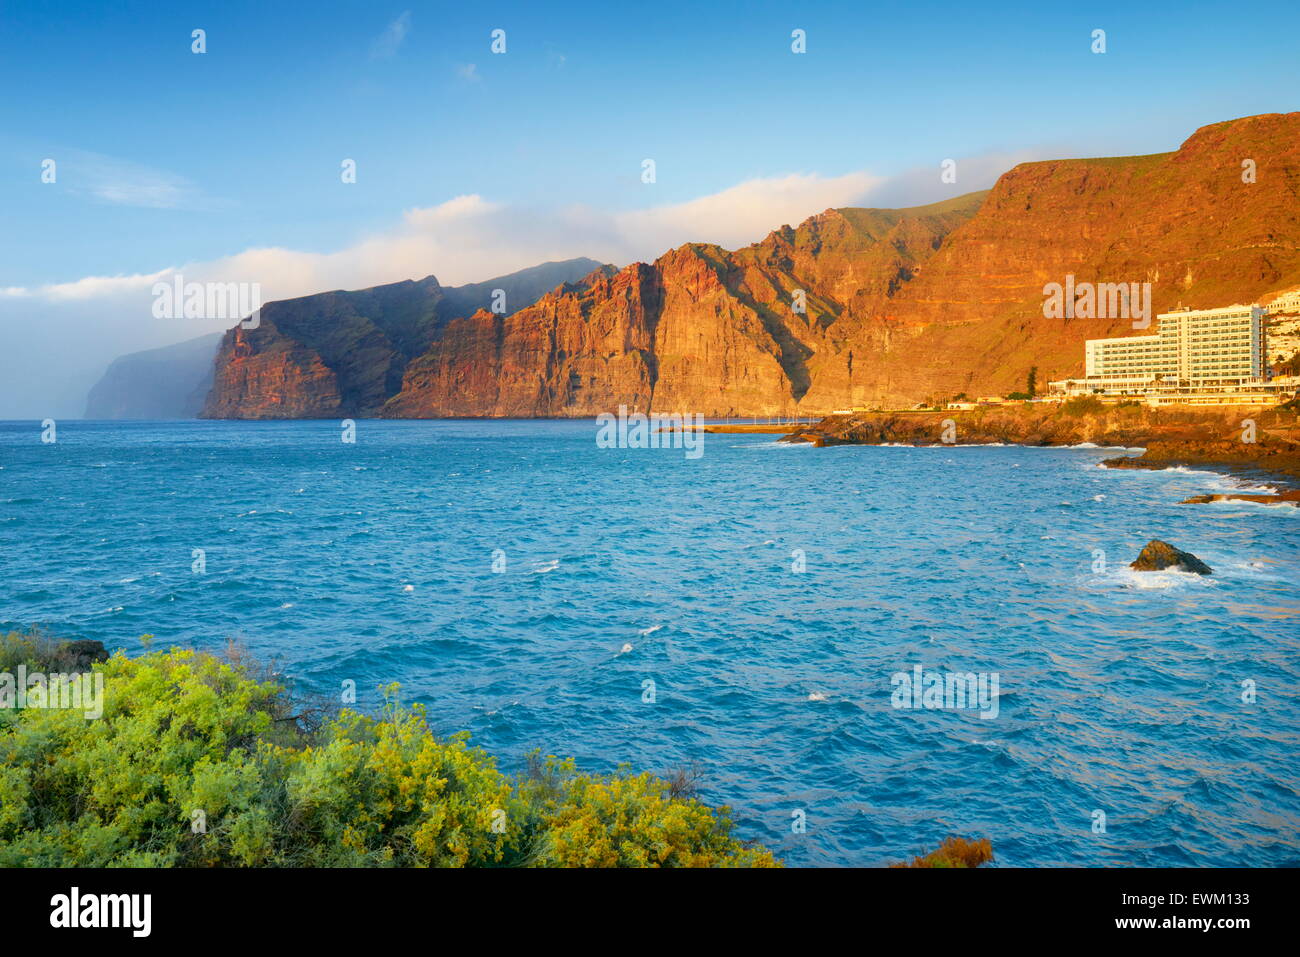 Los Gigantes Cliff, Tenerife, Canary Islands, Spain Stock Photo